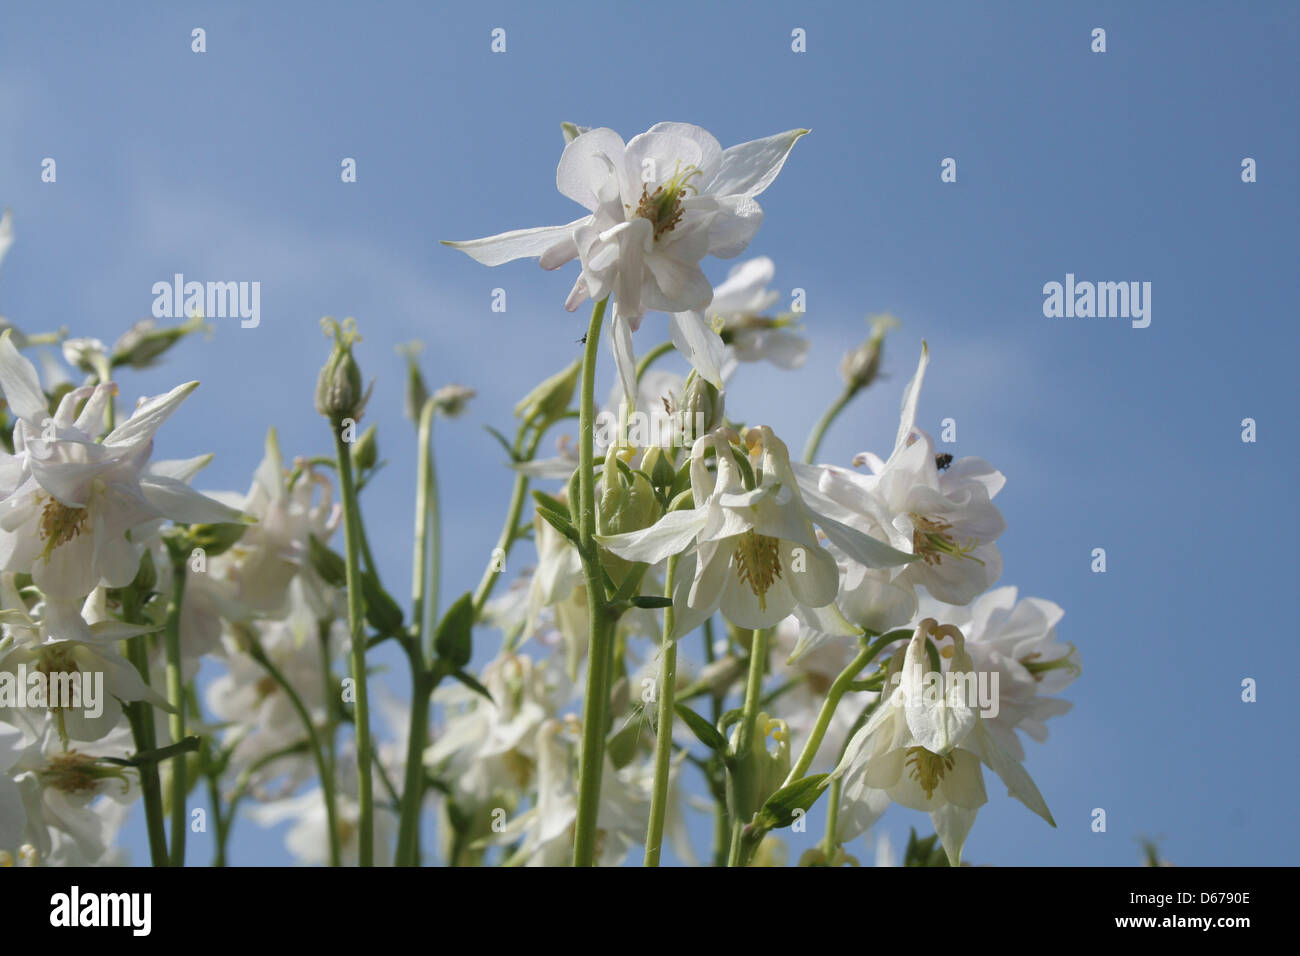 A white Aquilegia flower against blue sky in a cottage garden. Stock Photo